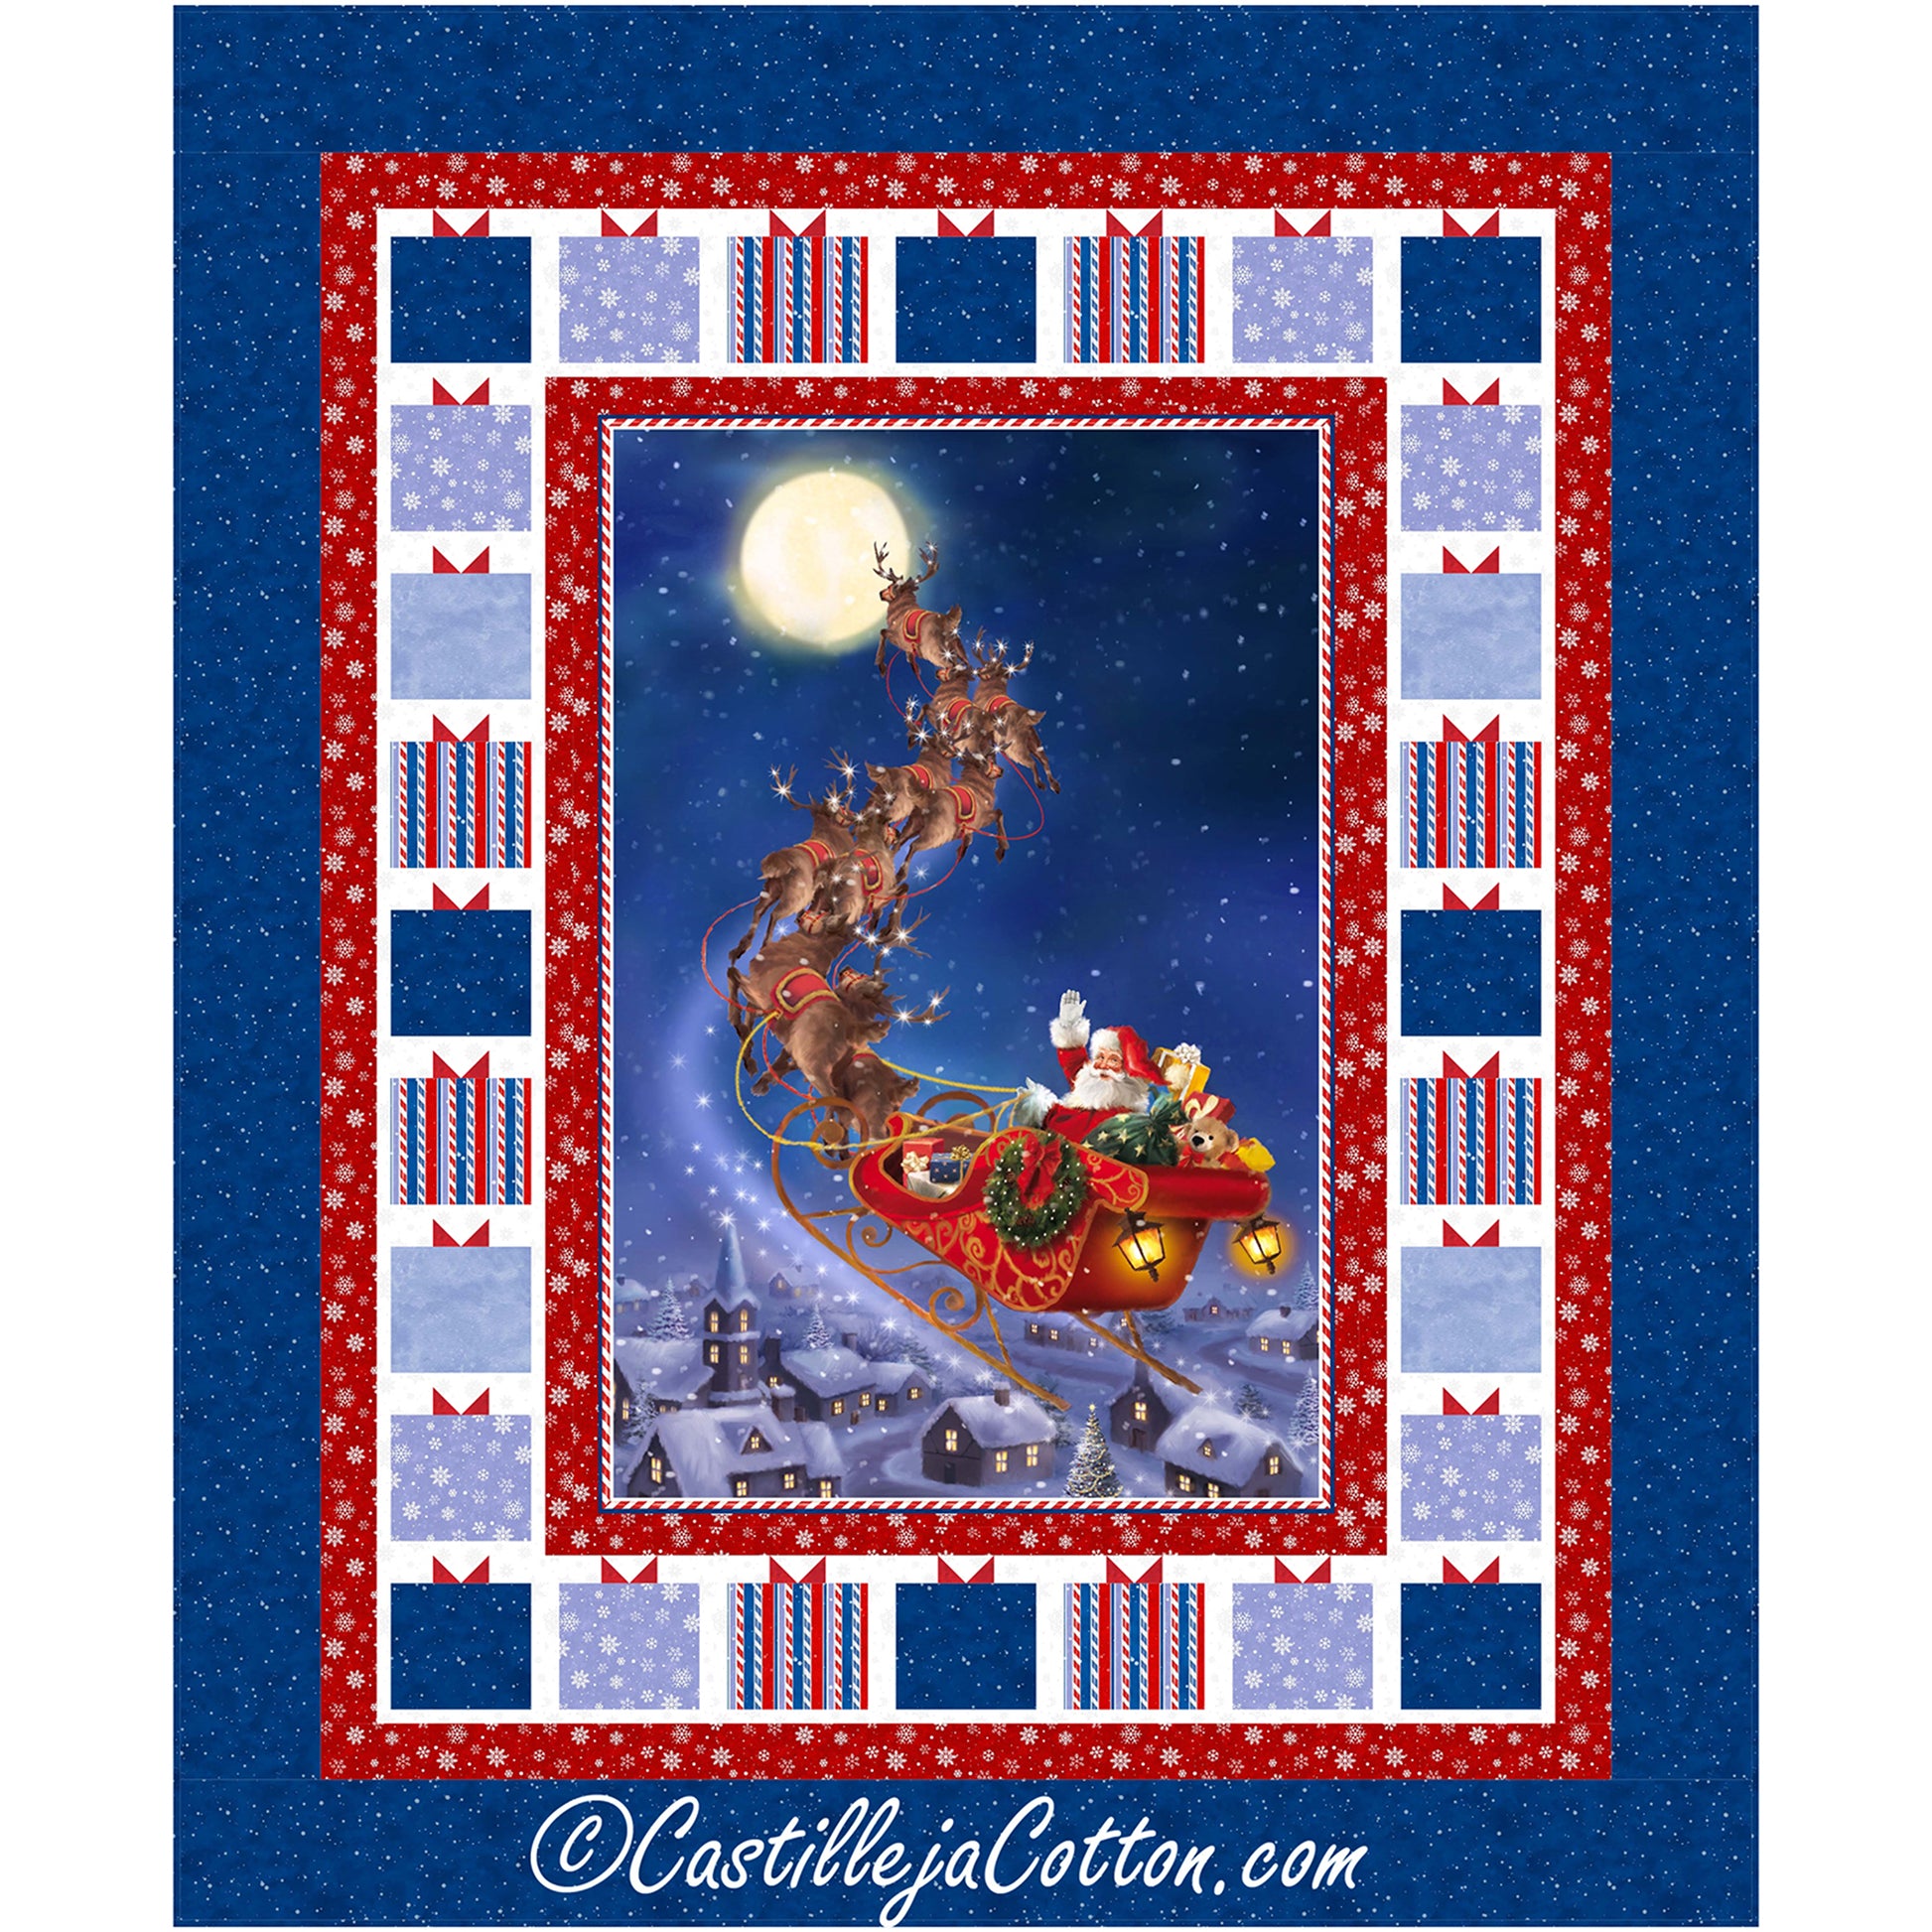 A festive quilt showcasing Santa Claus and his sleigh with a border of presents. Perfect for holiday cheer.